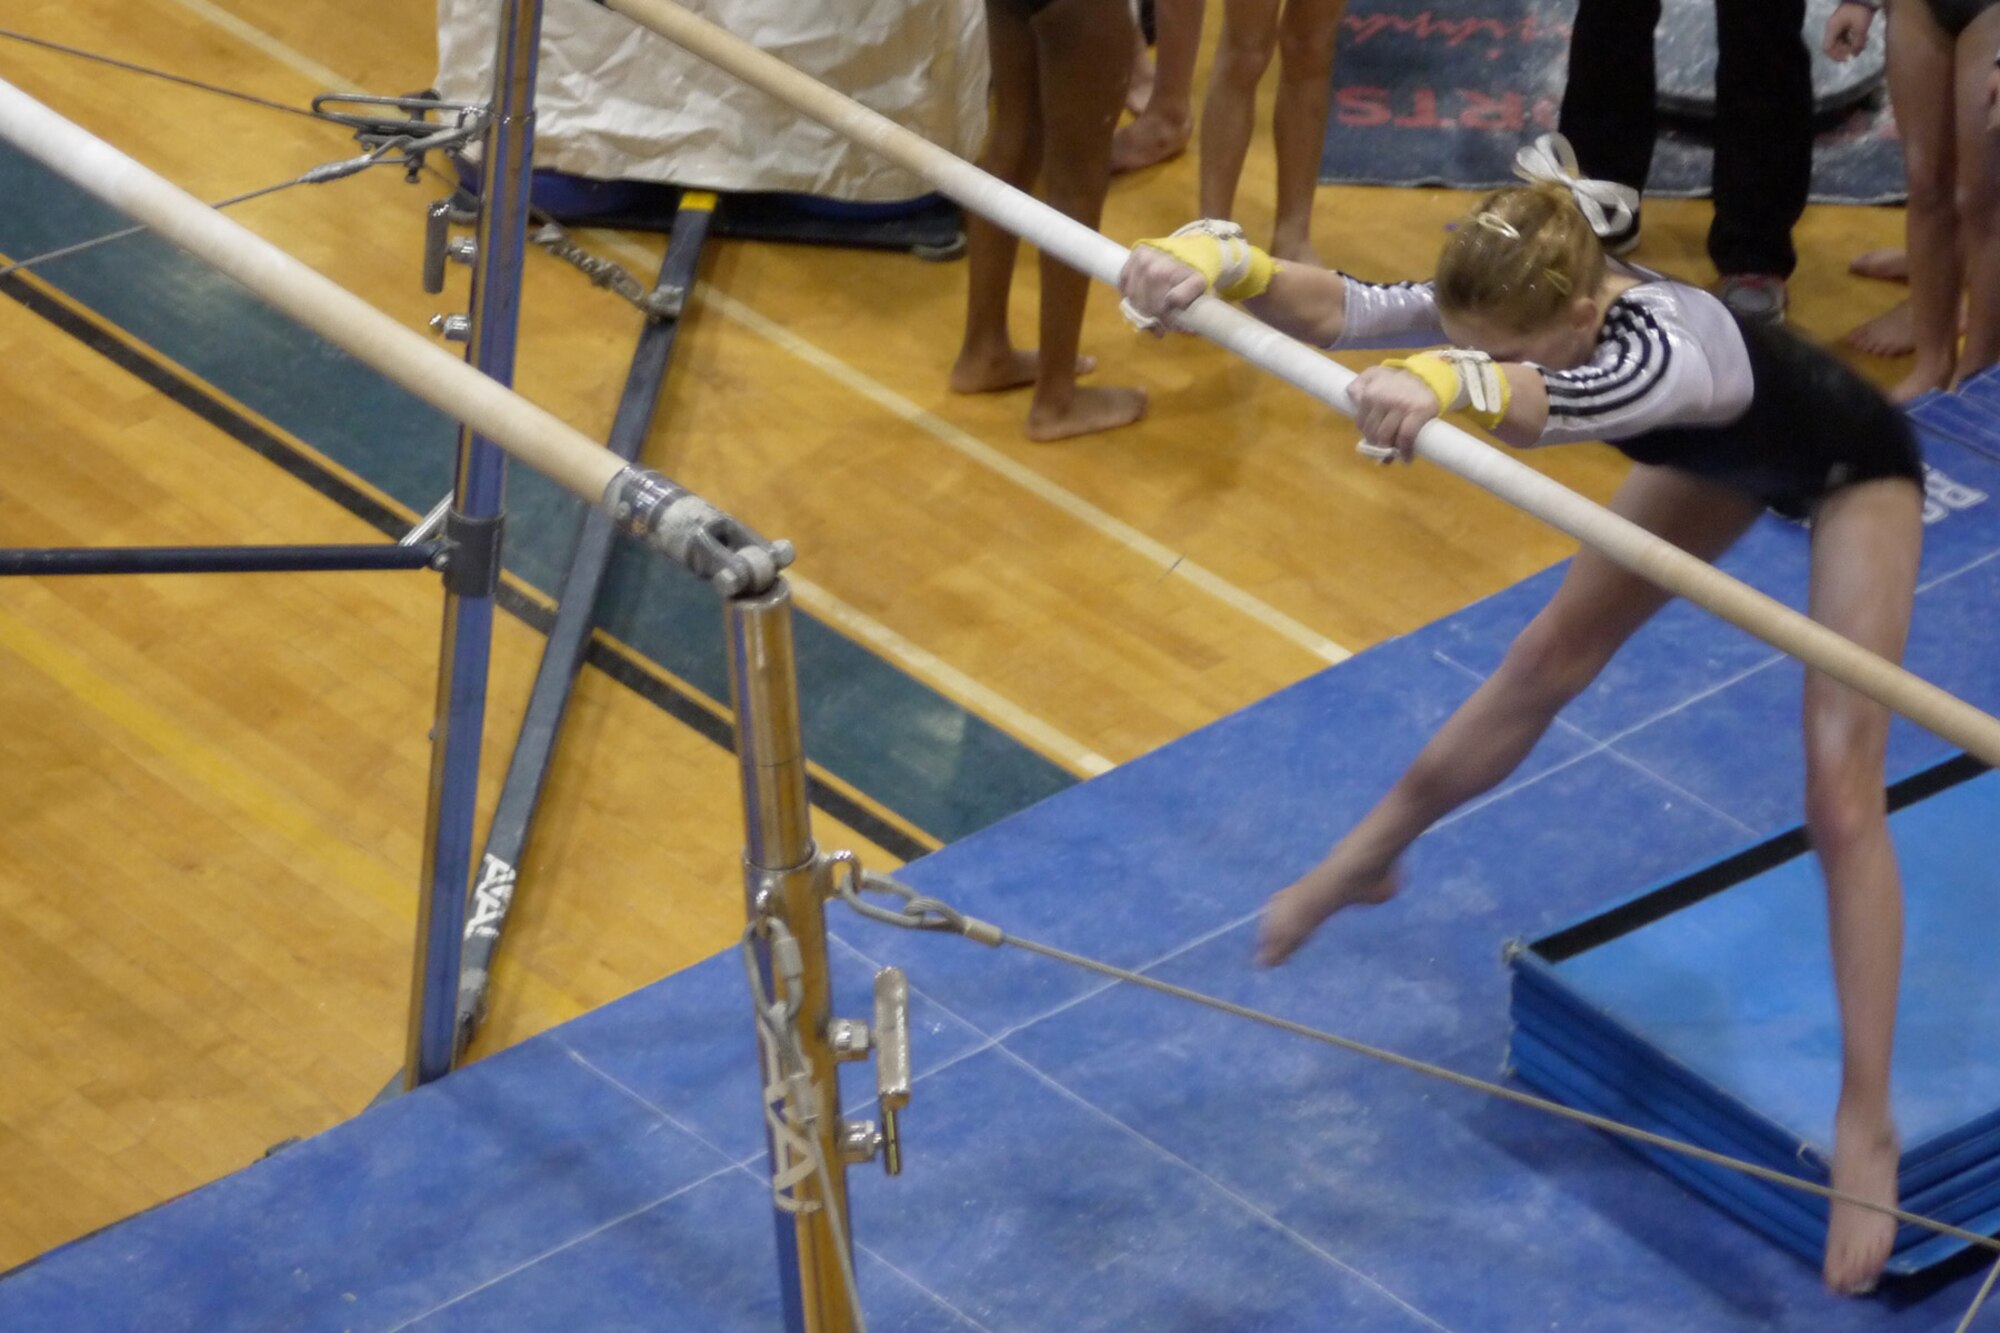 Renae Suberly, daughter of Maj. Michael Suberly, 8th Air Force Office of the Staff Judge Advocate, and Maj. Michelle Suberly, Air Force Global Strike Command Office of the Staff Judge Advocate, competes on the uneven bars during the Emerald Classic Feb 16-17 in Cabot, Ark. Suberly her team to a first-place finish in the competition.